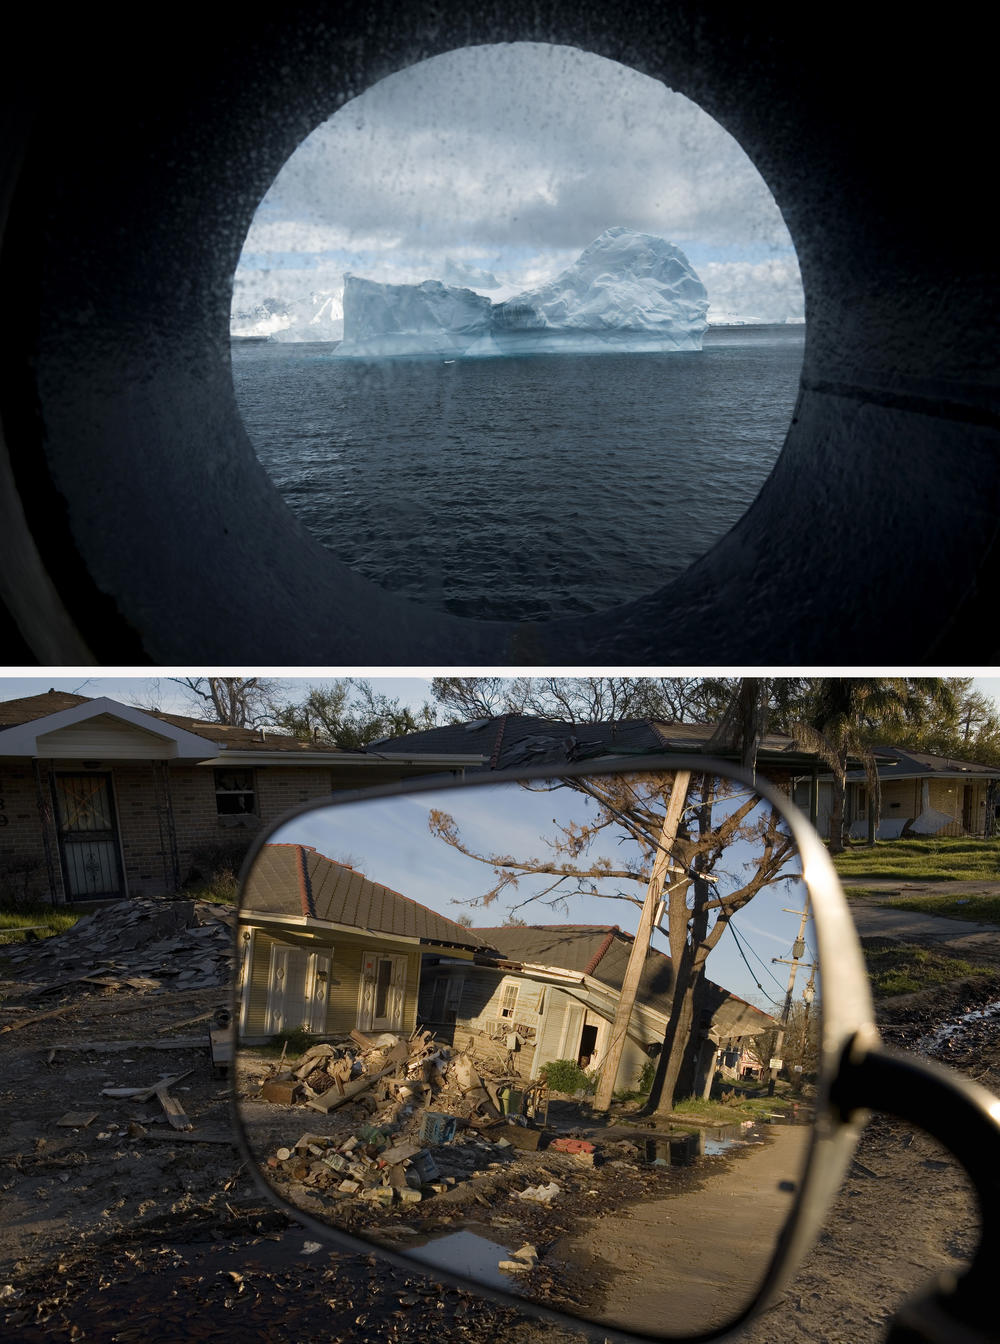 (Top image) An iceberg floats in Wilhelmina Bay on the west side of the Antarctic Peninsula in November 2017. (Bottom image) Flood-damaged homes in the Lakeview area of New Orleans in March 2006. More than 80% of the city was flooded by the Hurricane Katrina stormwaters. Sea level rise and super-charged storm surges put low-lying communities around the world at risk.